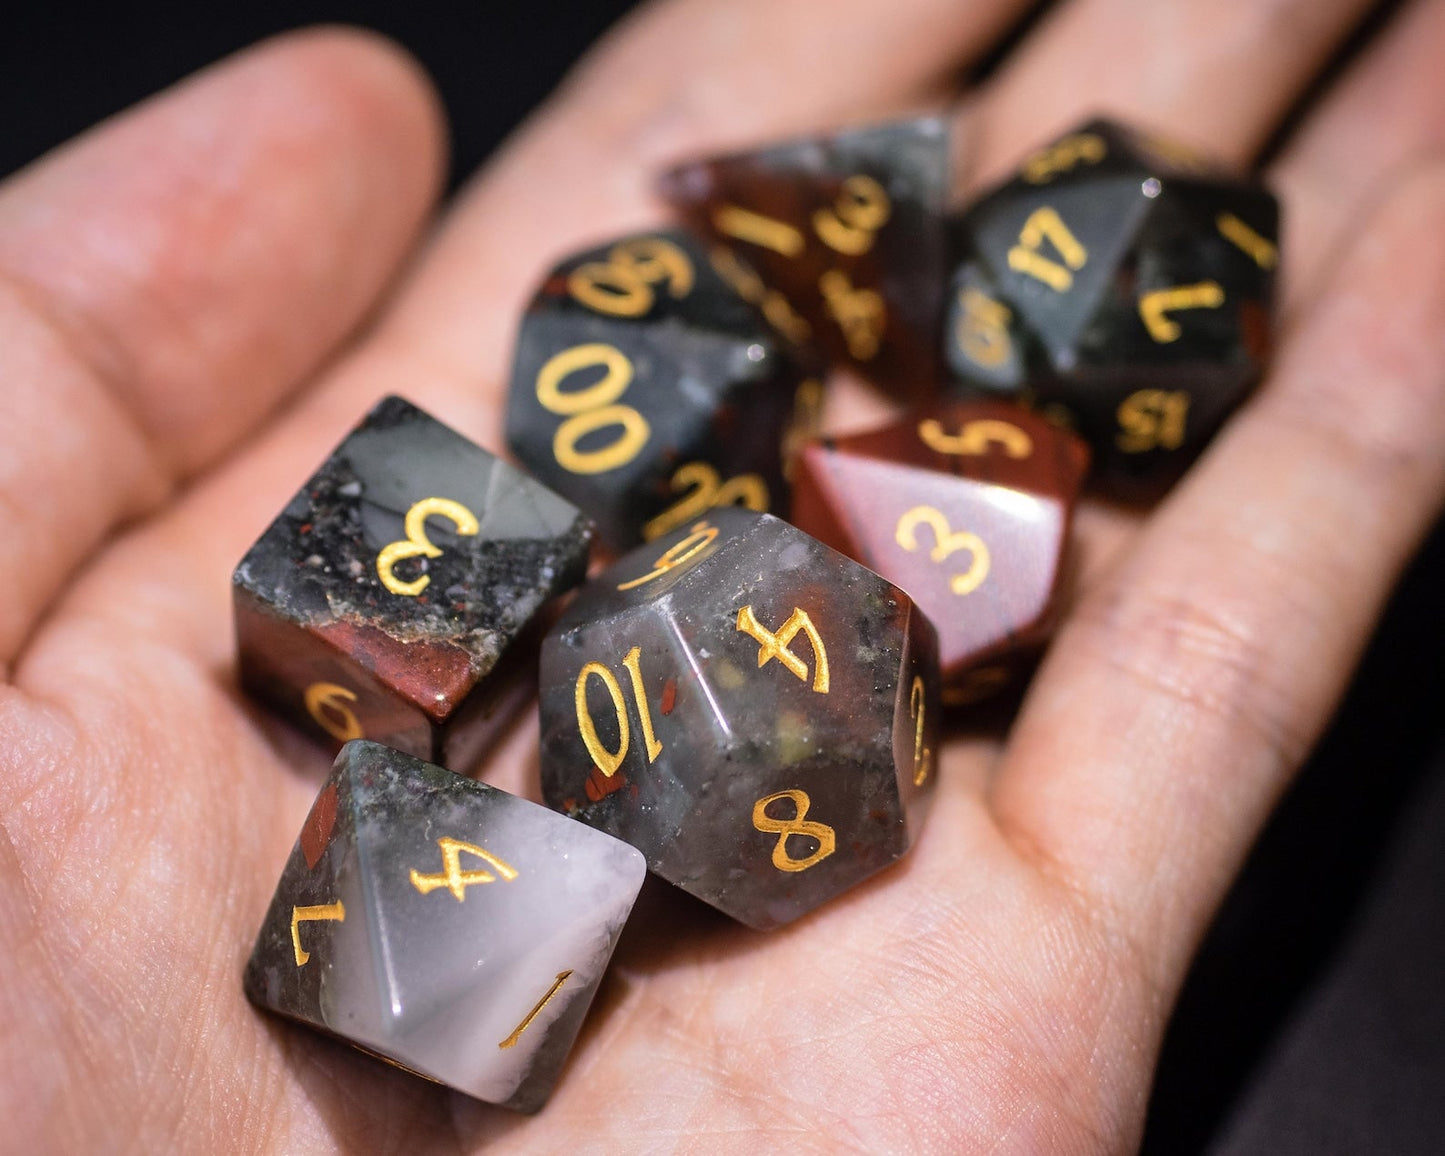 FREE Today: Bloodstone Gemstone Dice (Give away a random dice)